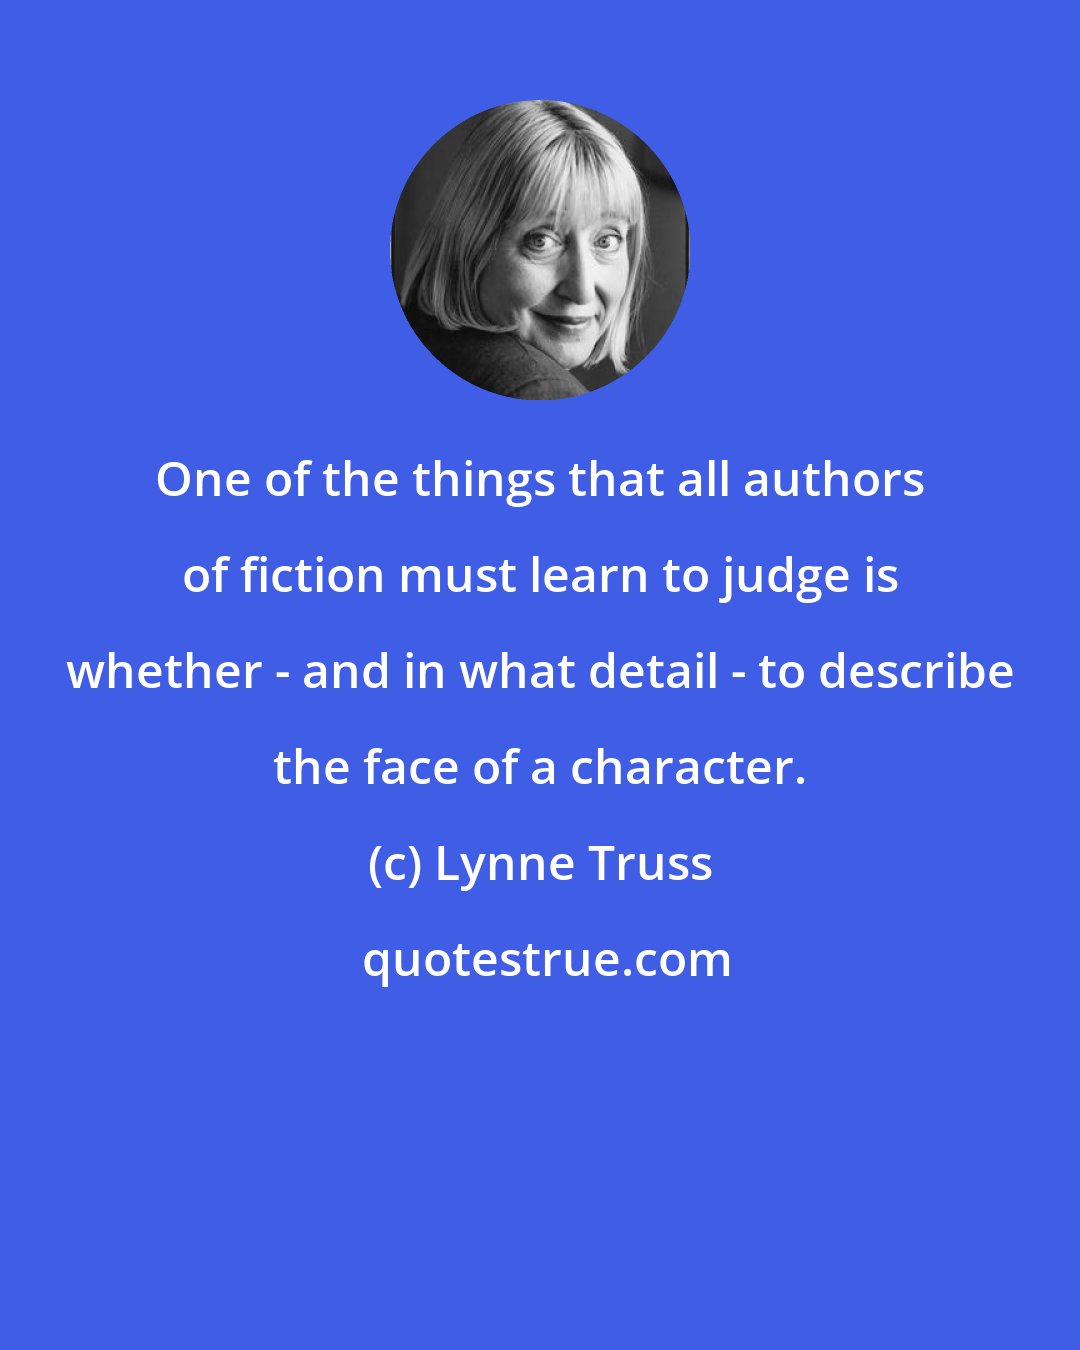 Lynne Truss: One of the things that all authors of fiction must learn to judge is whether - and in what detail - to describe the face of a character.